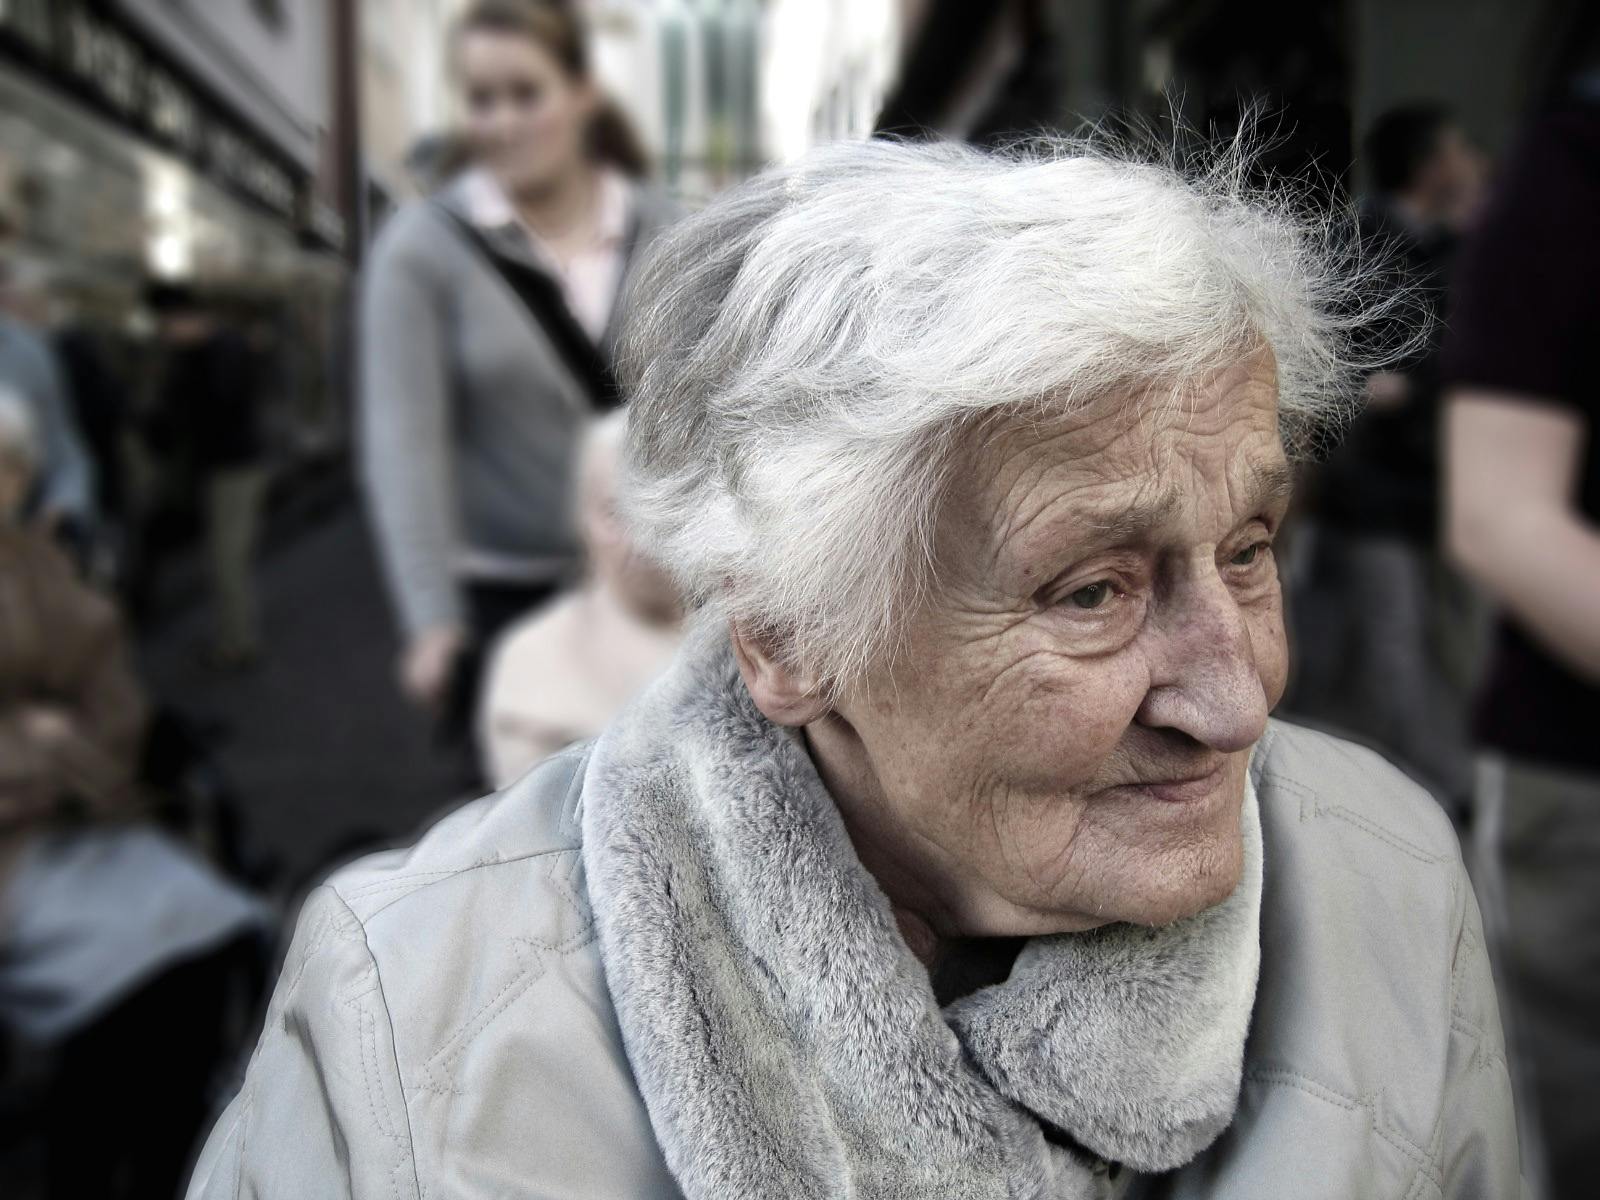 An elderly woman in the midst of people | Photo: Pexels